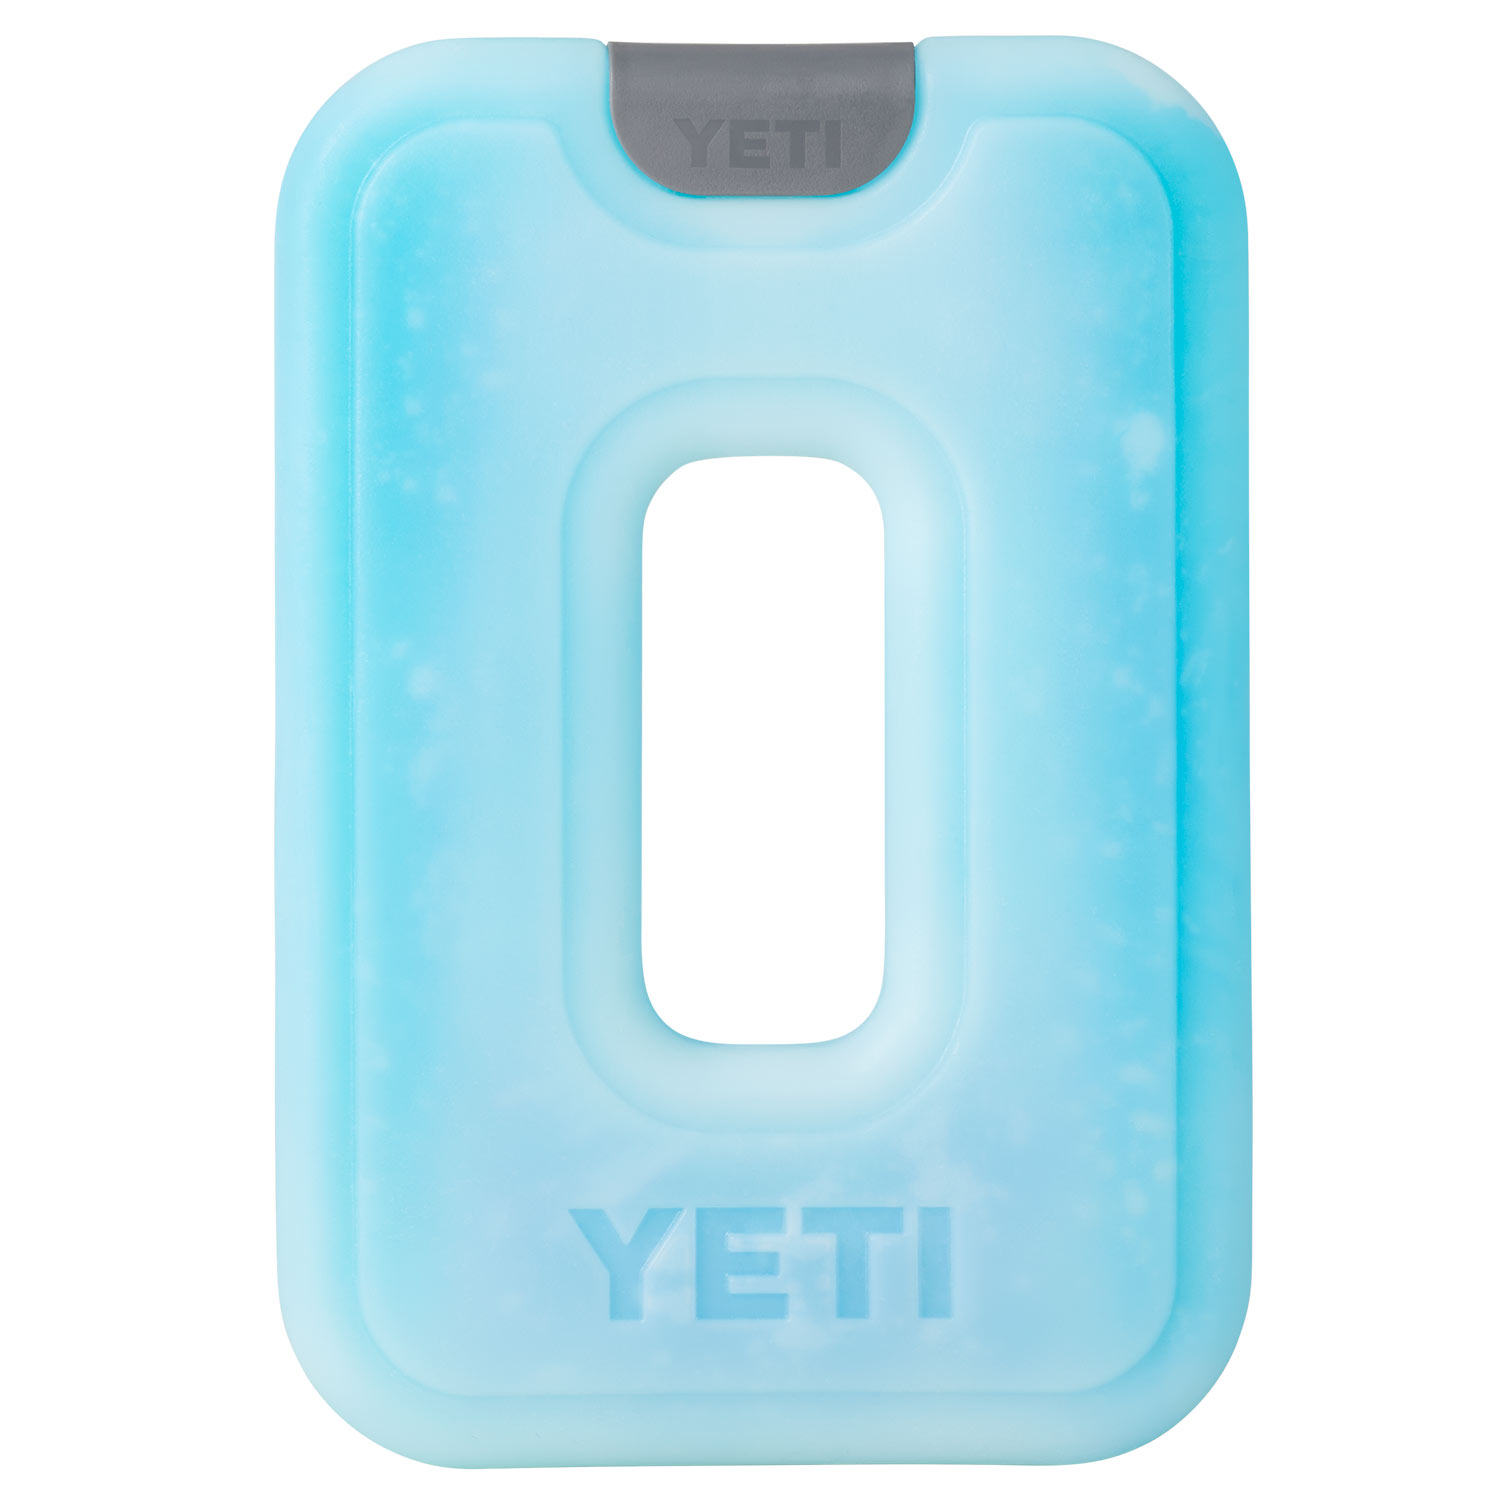 Two medium thin ice packs fit perfect in the Daytrip and keeps your food  perfectly cold for a day. : r/YetiCoolers